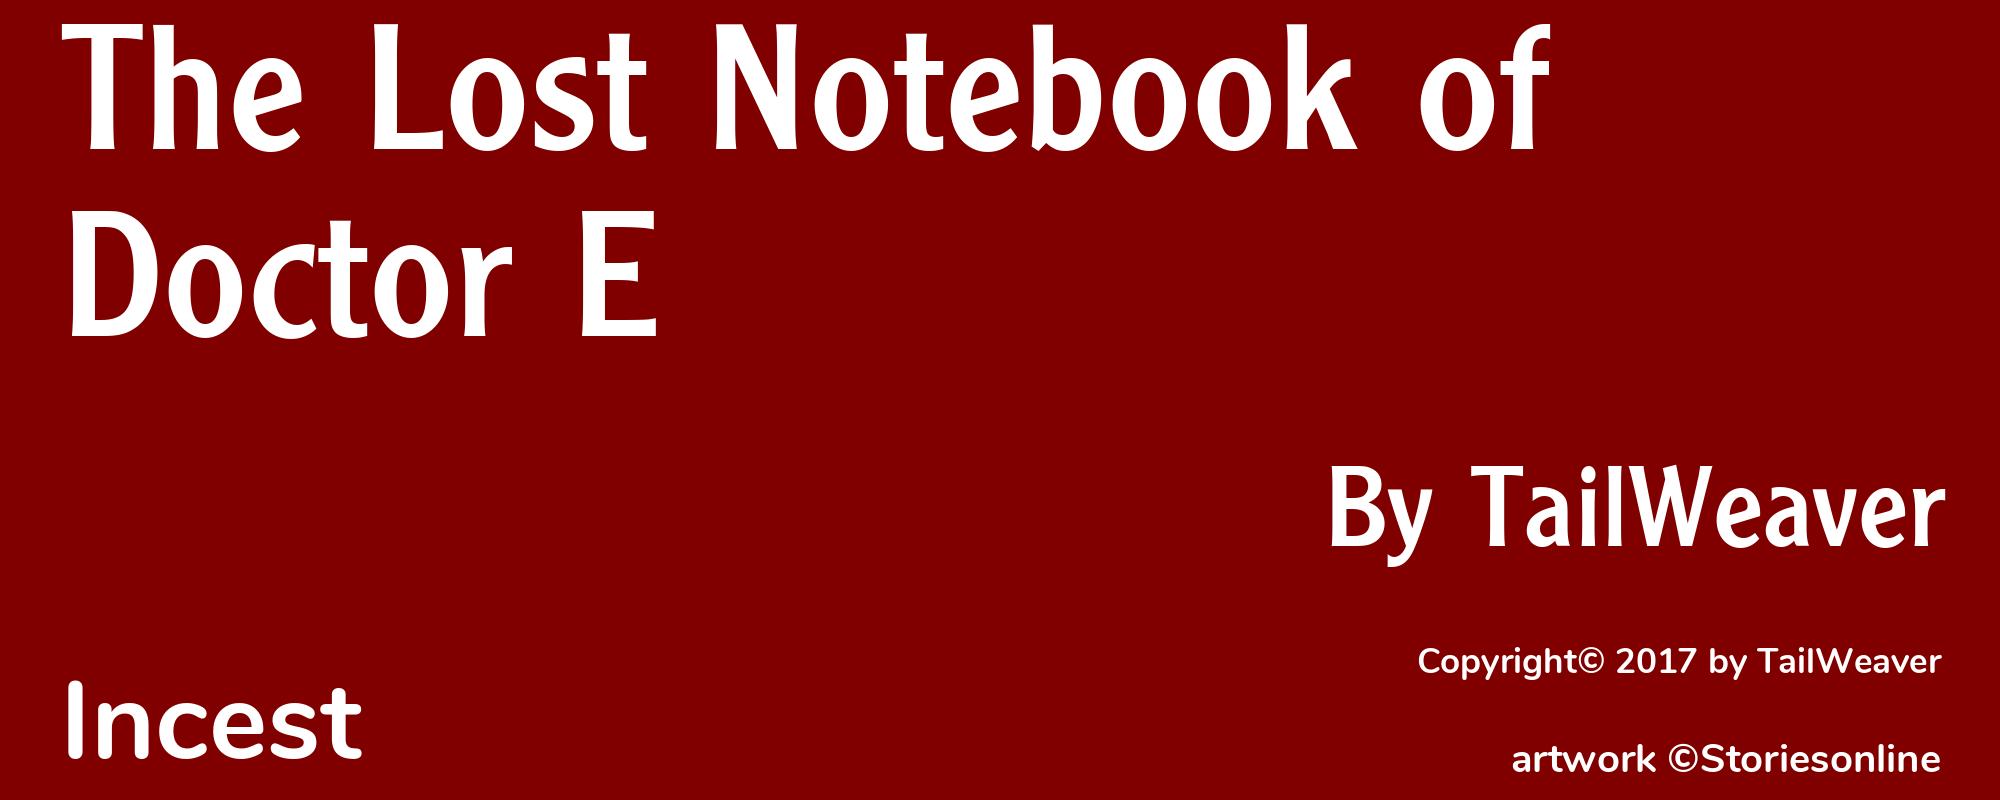 The Lost Notebook of Doctor E - Cover